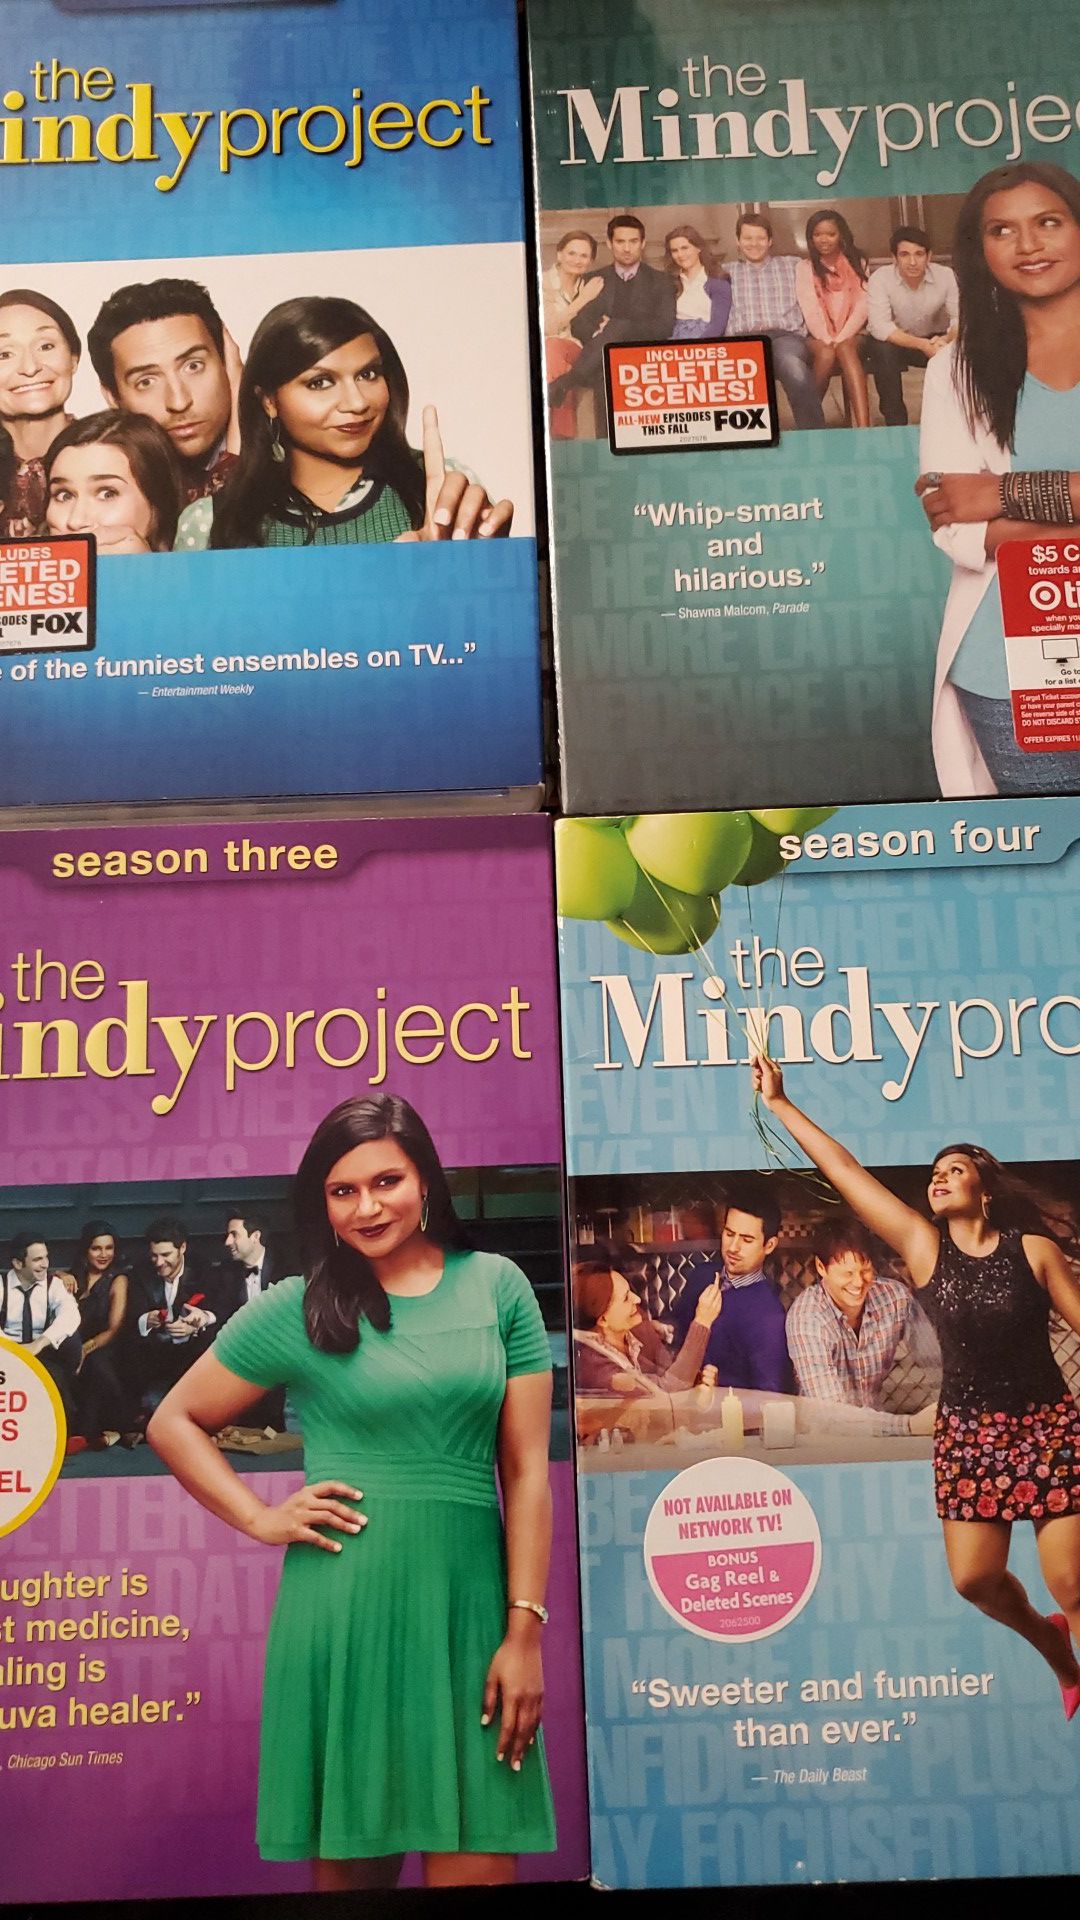 The Mindy project- seasons 1-4